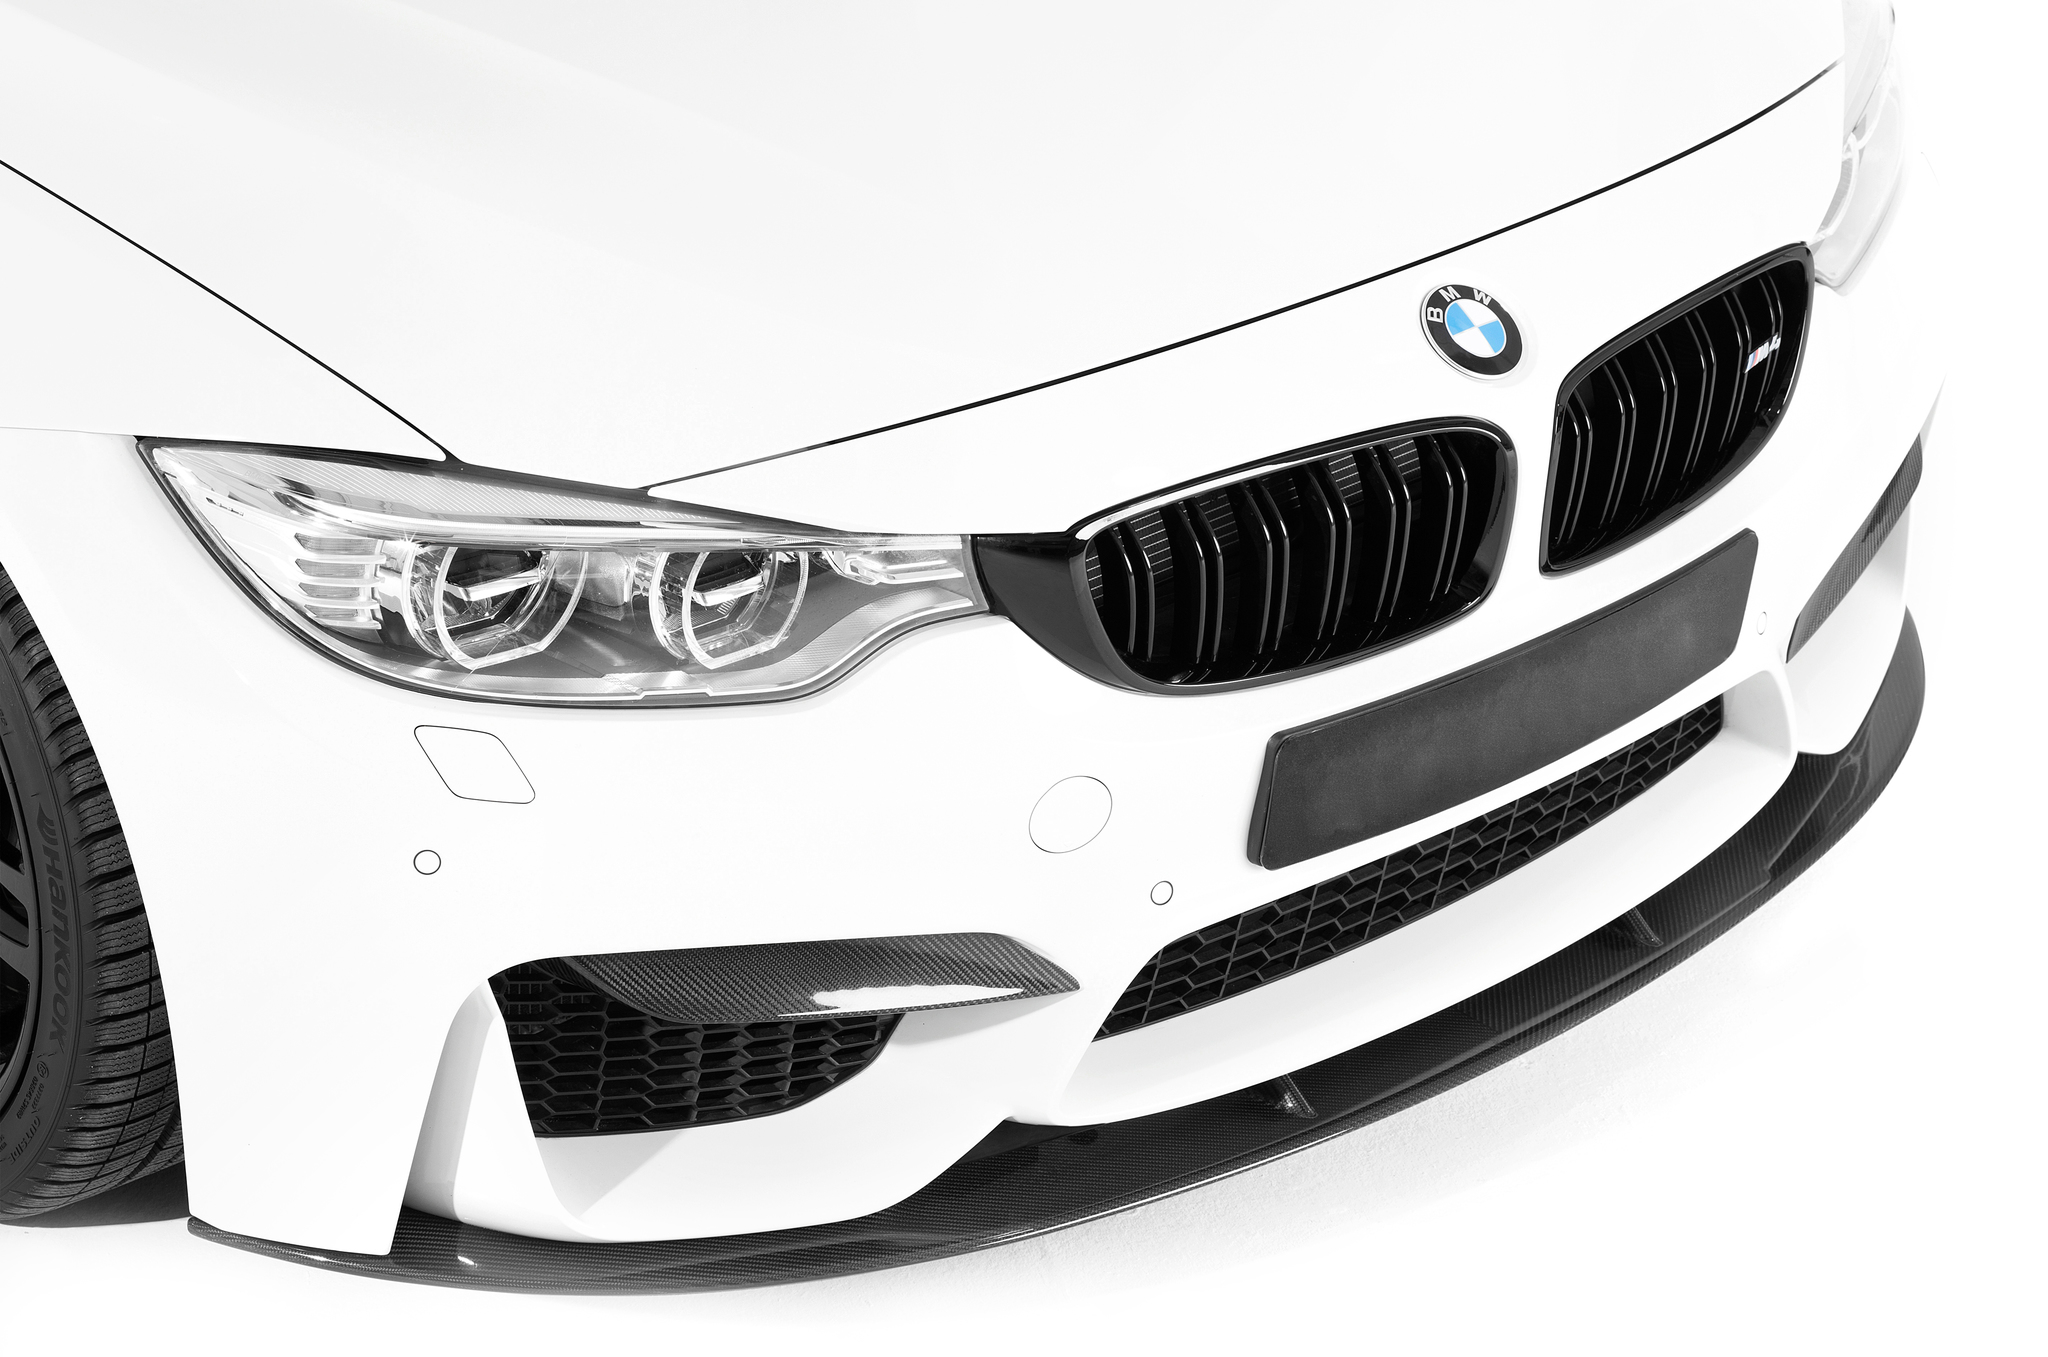 Sterckenn Carbon Fiber front covers for BMW M3 F80 new model